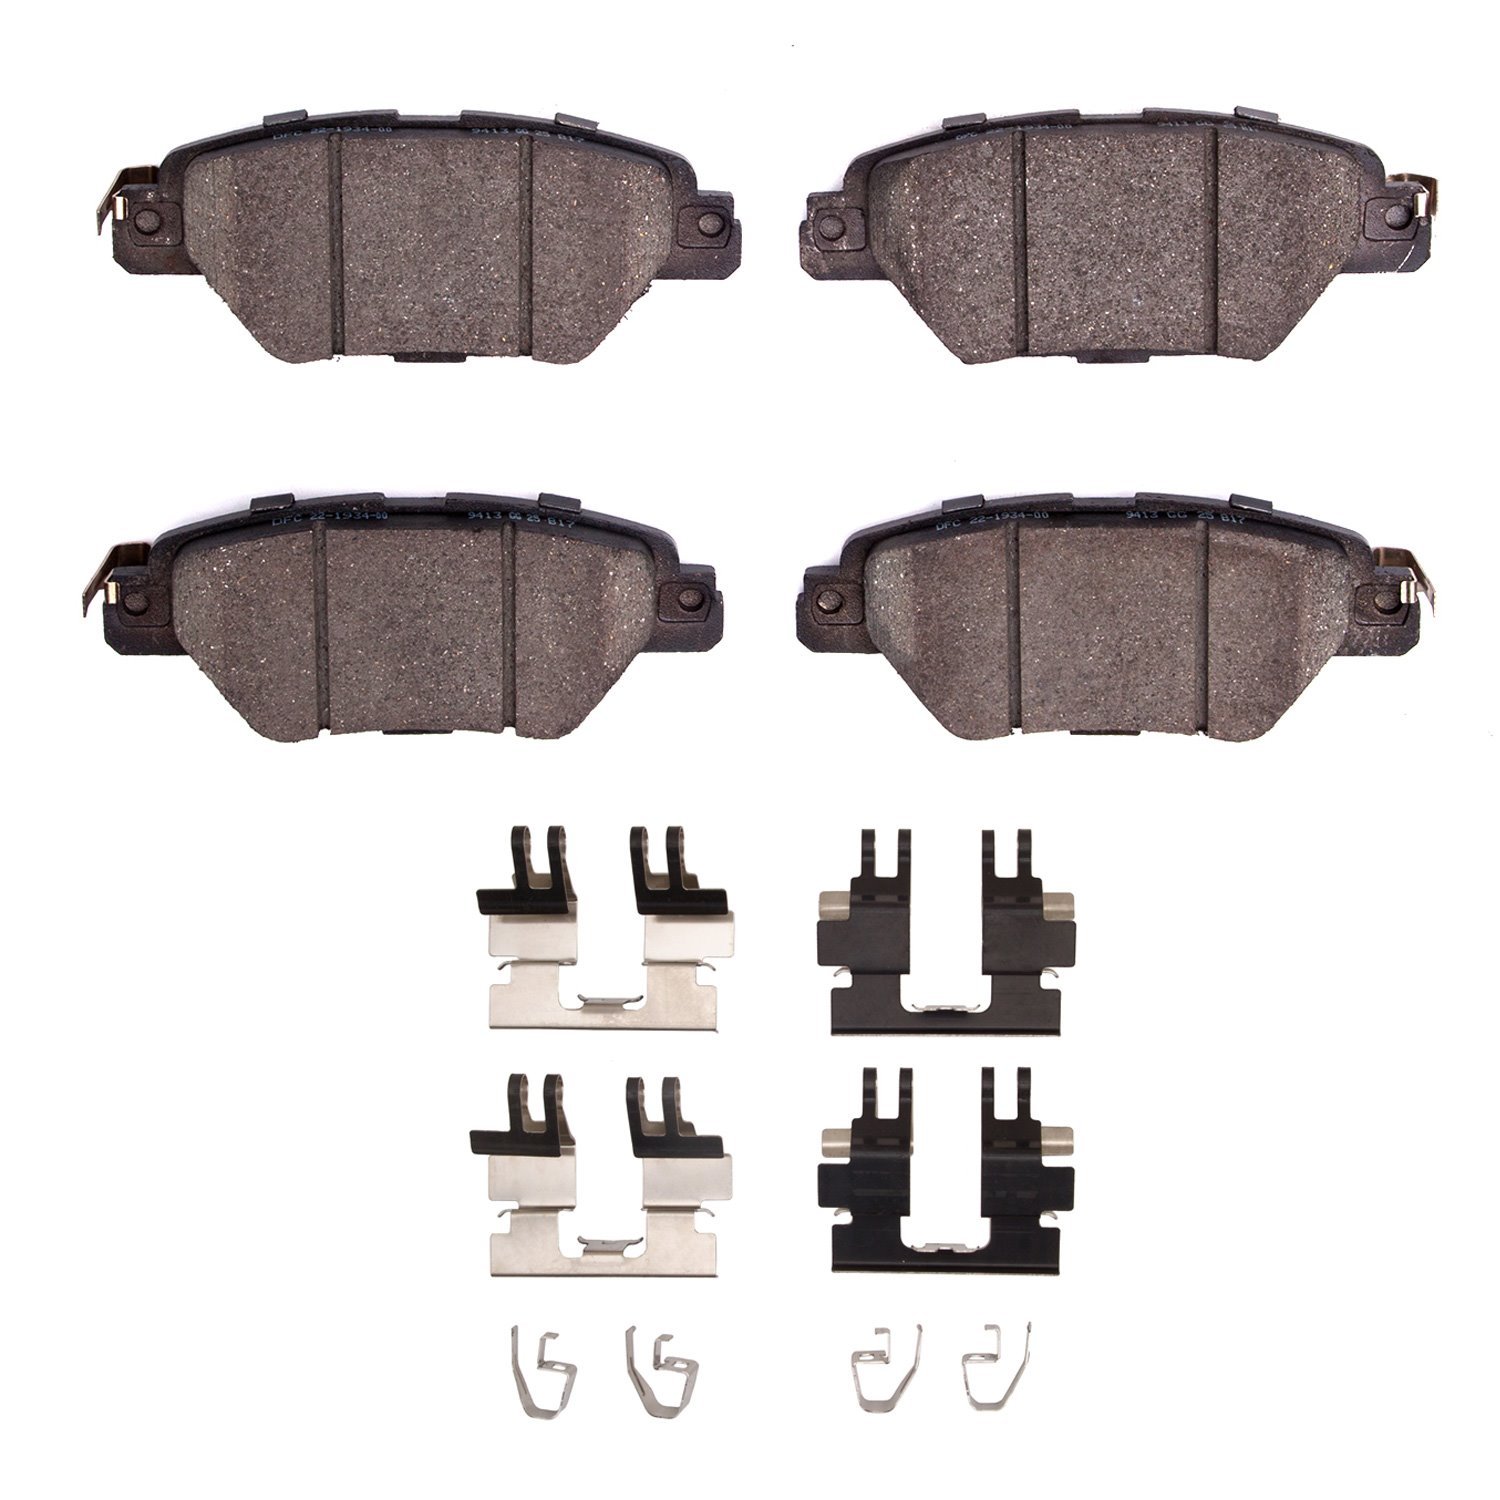 1310-1934-01 3000-Series Ceramic Brake Pads & Hardware Kit, Fits Select Ford/Lincoln/Mercury/Mazda, Position: Rear